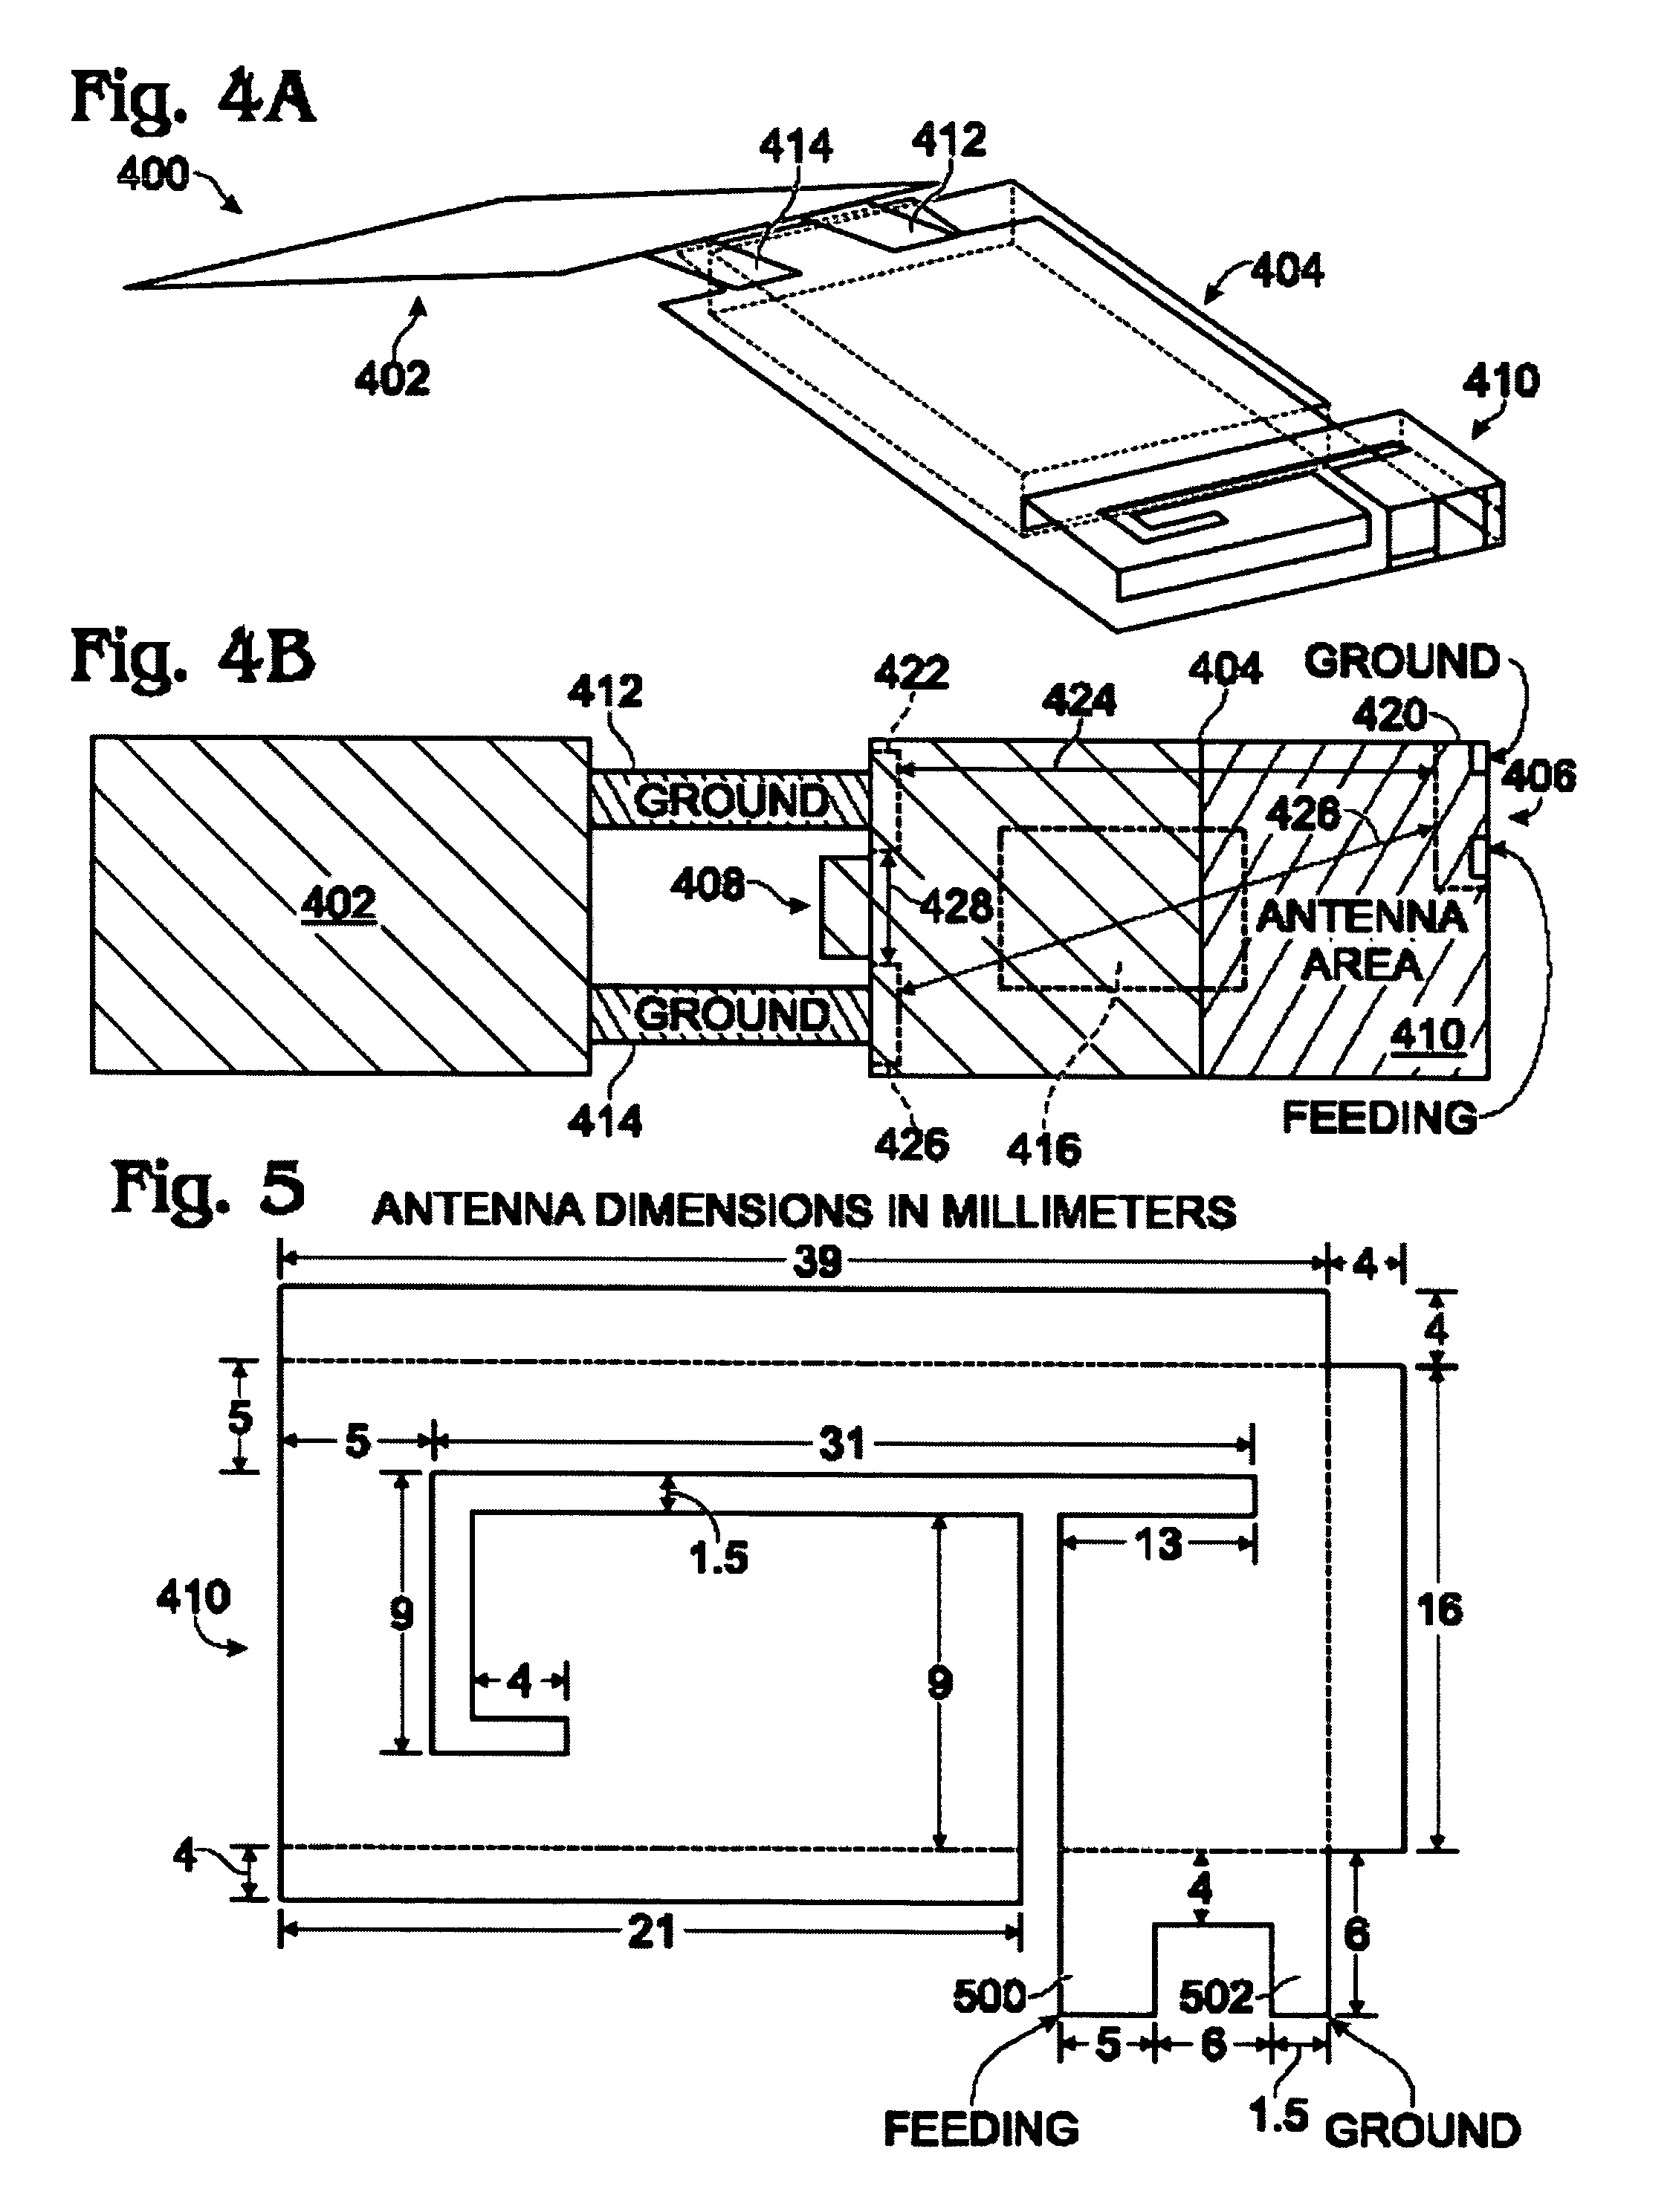 Multipart case wireless communications device with multiple groundplane connectors